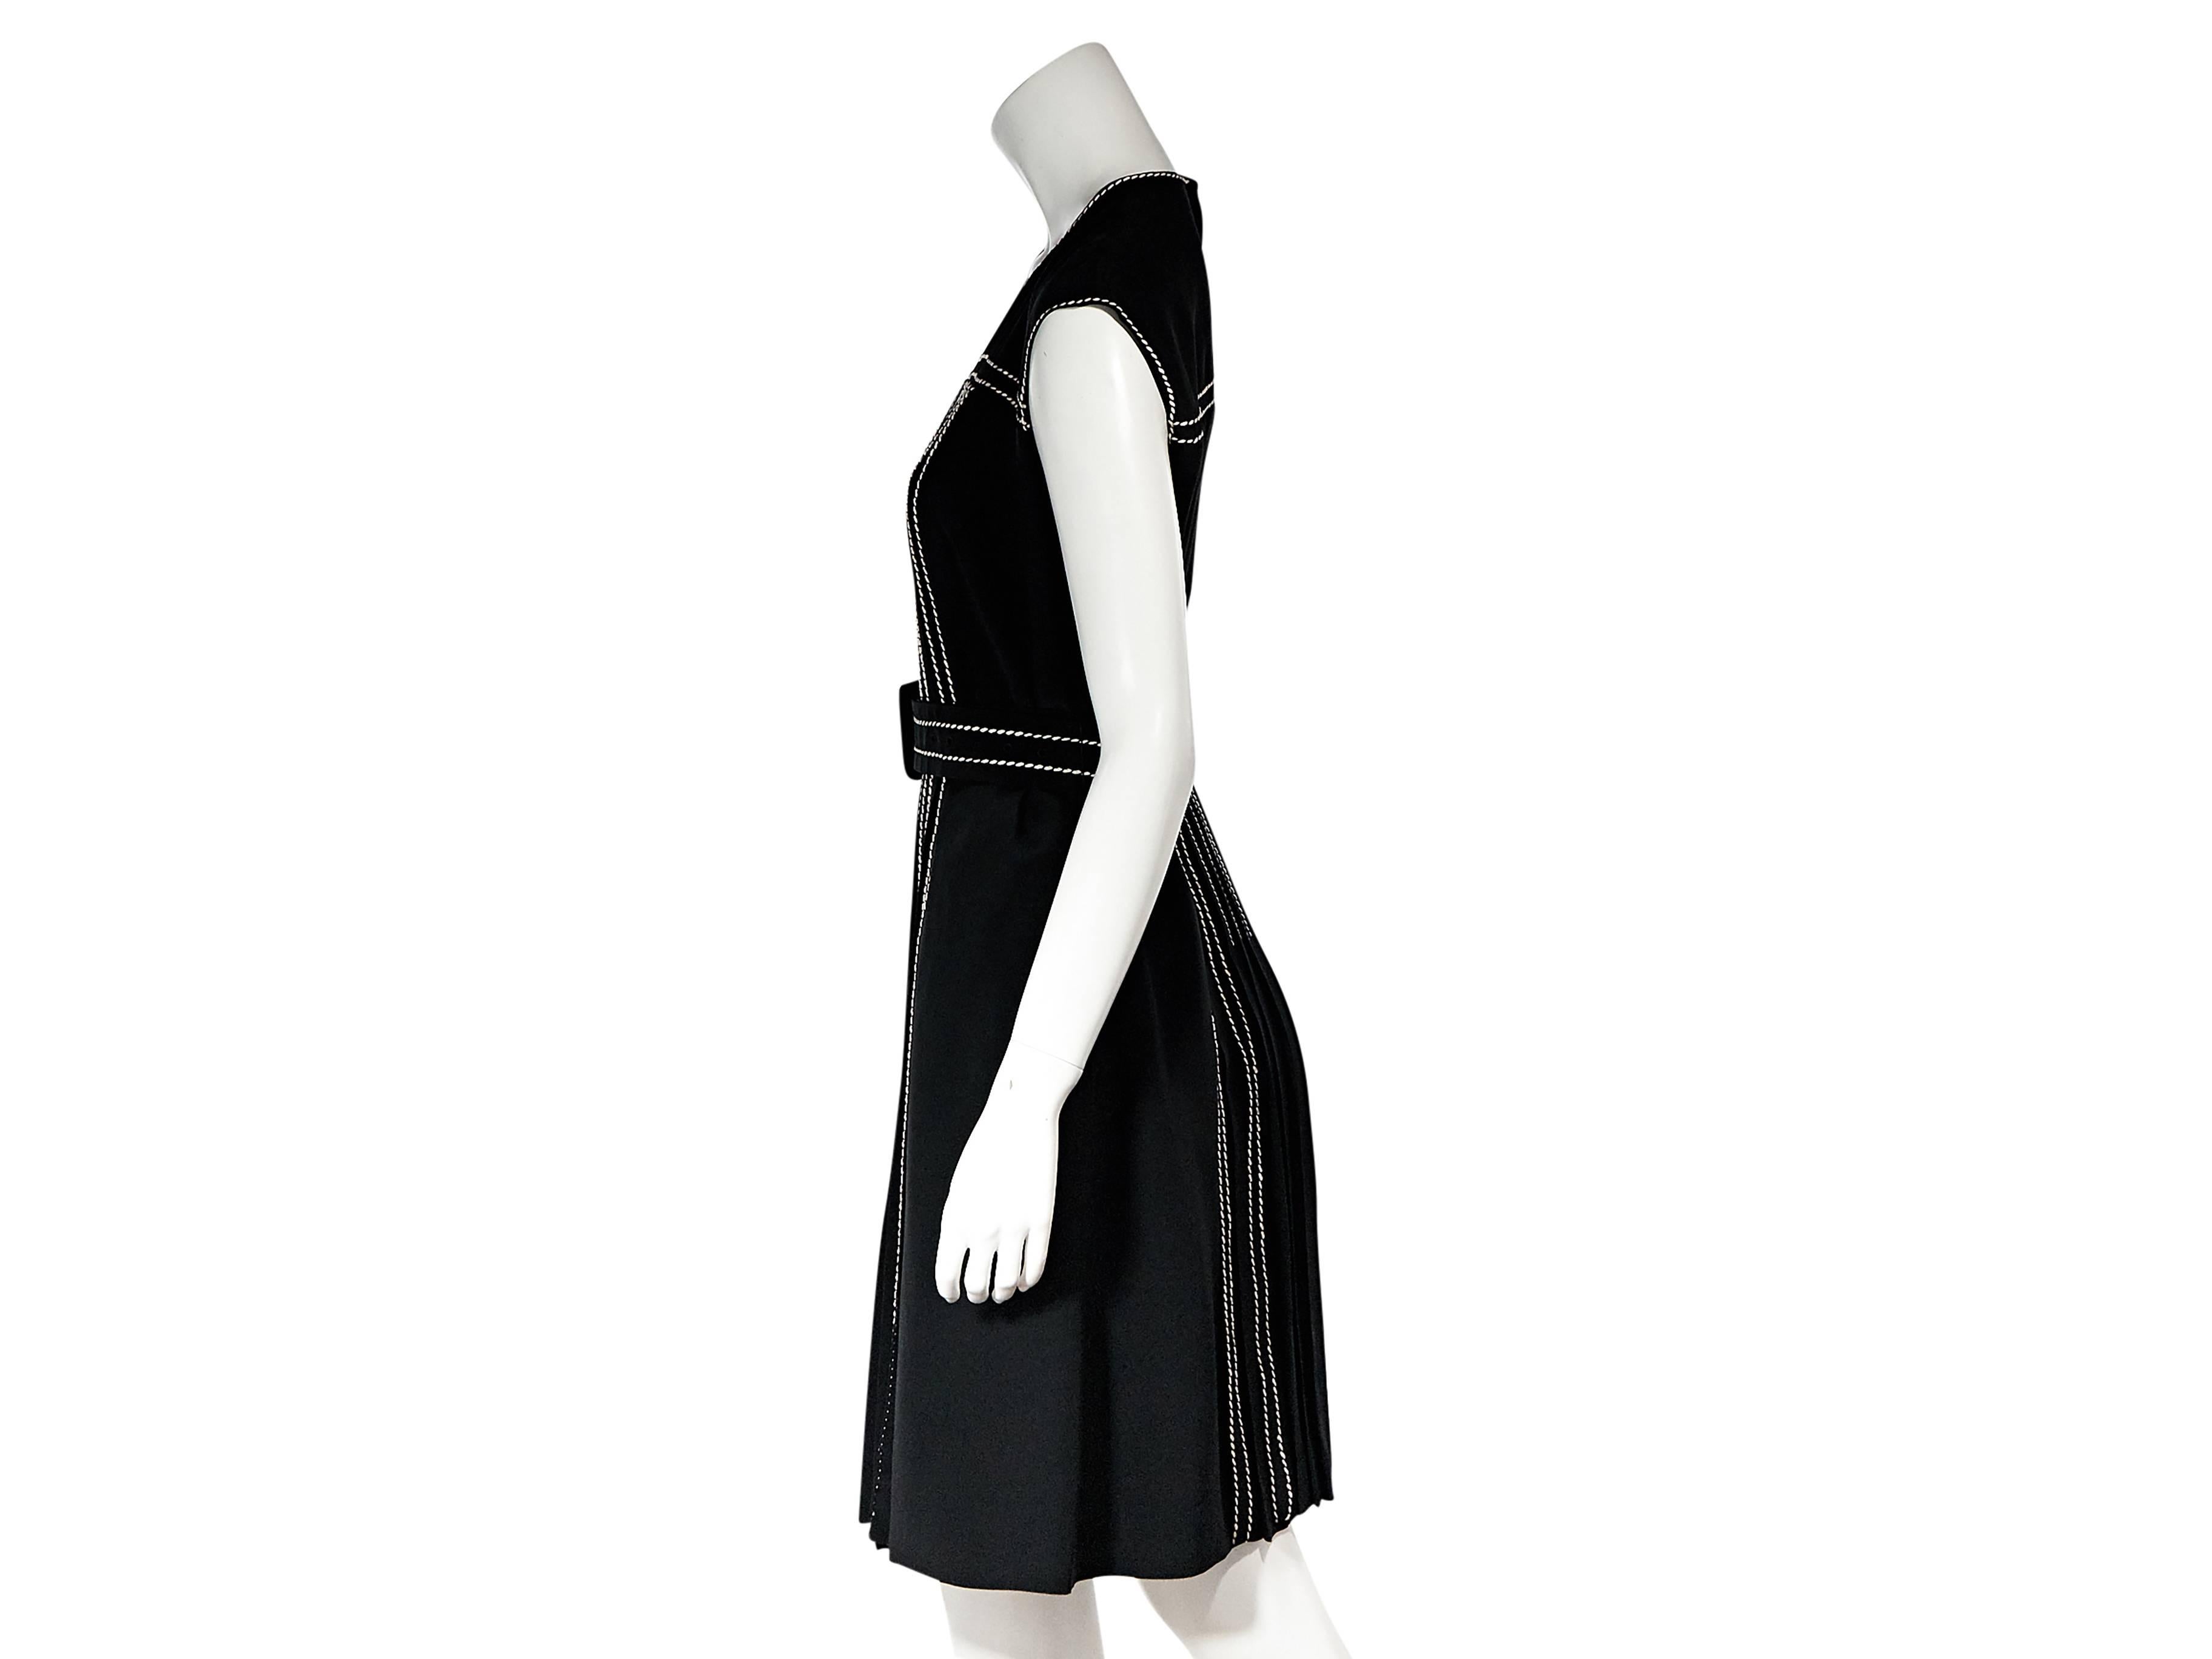 Product details: Black silk belted dress by Prada. Accented with topstitching and front pleats. Jewelneck. Cap sleeves. Adjustable belted waist. Back button closure with keyhole cutout. 
Condition: New with tags. 
Est. Retail $ 1,600.00